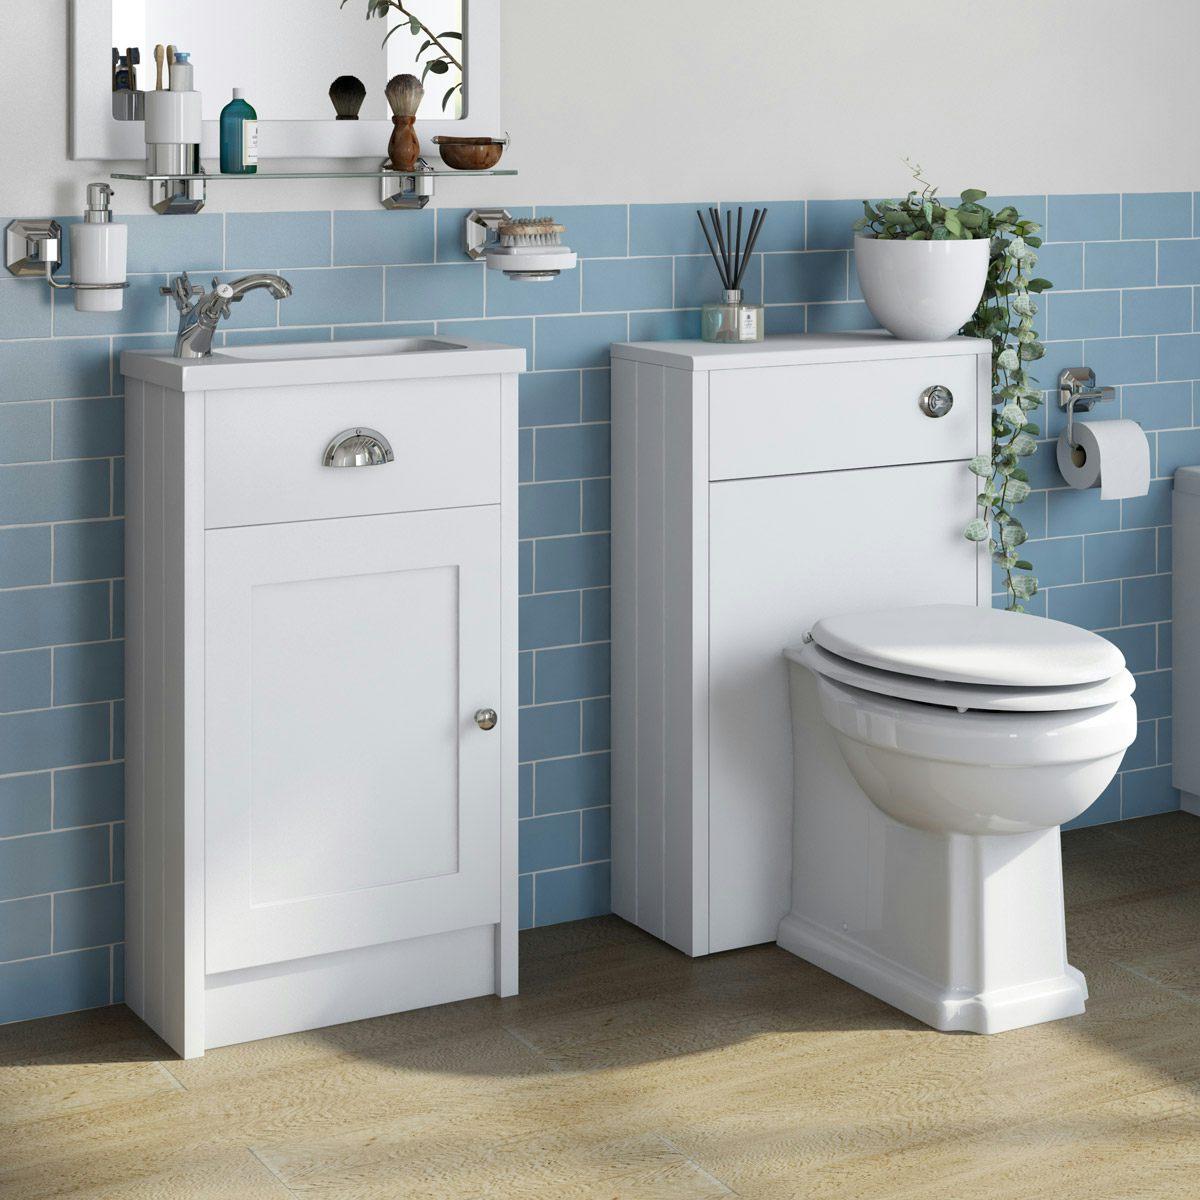 Orchard Dulwich matt white cloakroom combination with traditional toilet and white wooden seat